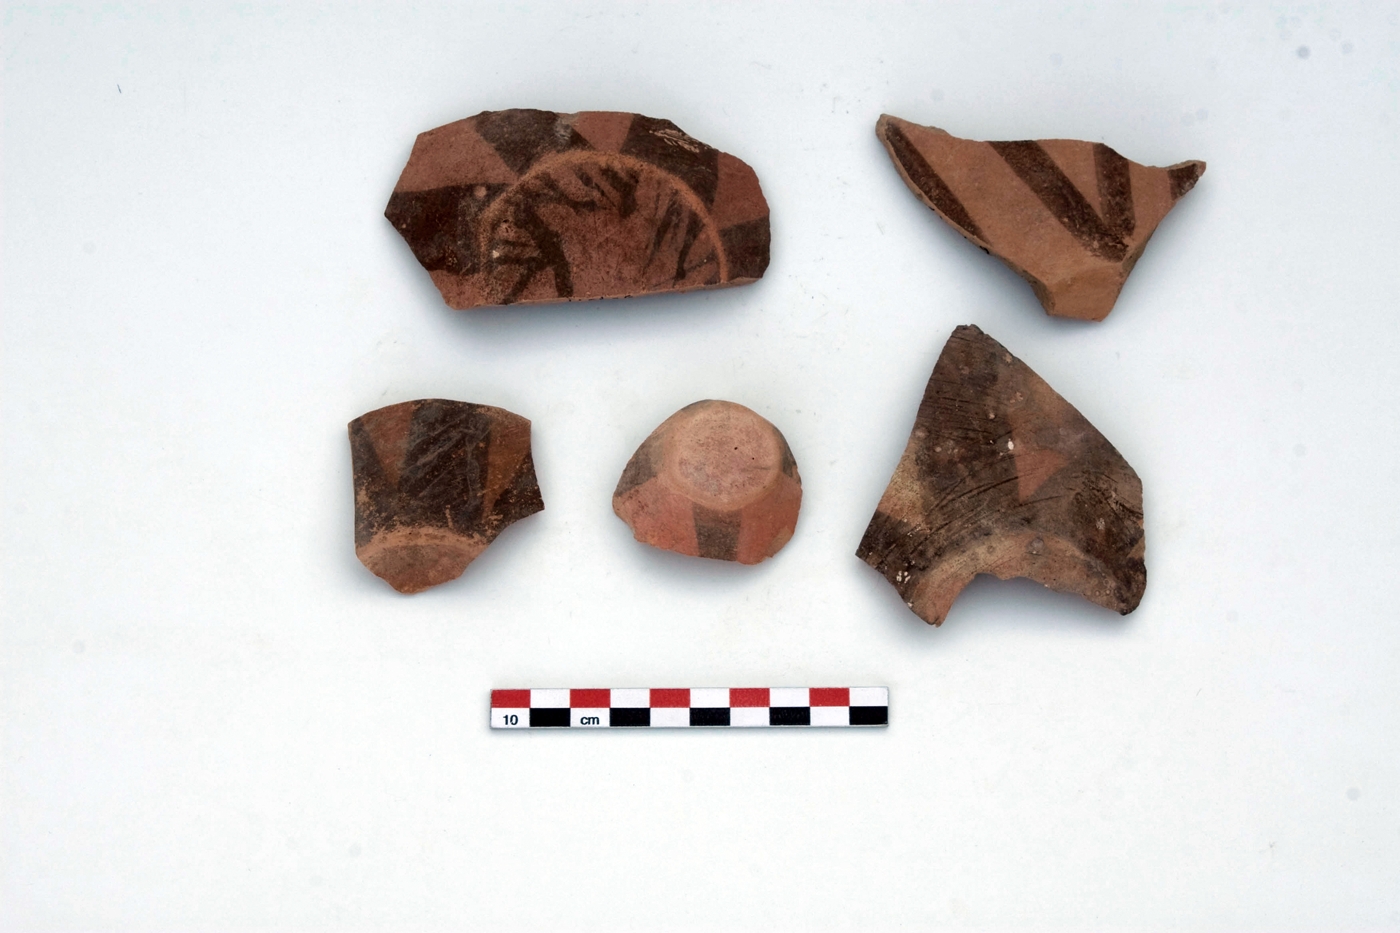 Meana Black on Red bases with rays extending upwards from the base. Viewed from the bottom, they present a star-shaped pattern. The edges of the slightly concave bases are heavily worn, indicating that the vessels have been moved around a lot during their use.